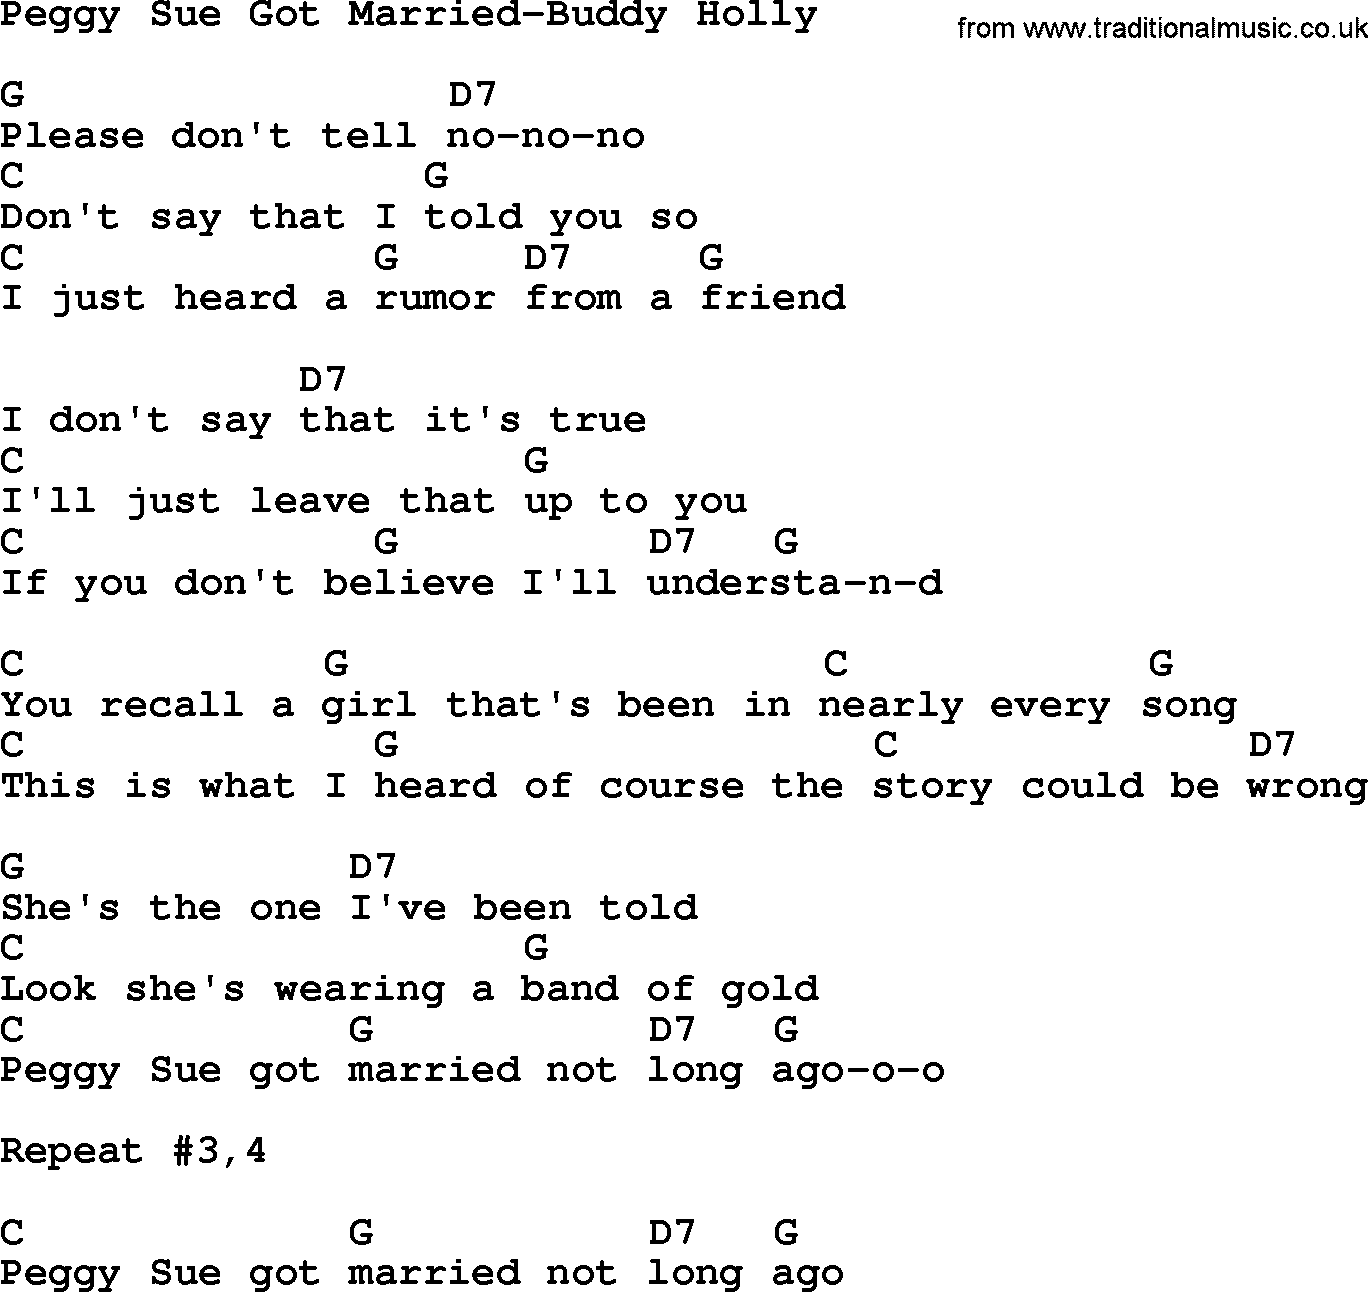 Country music song: Peggy Sue Got Married-Buddy Holly lyrics and chords